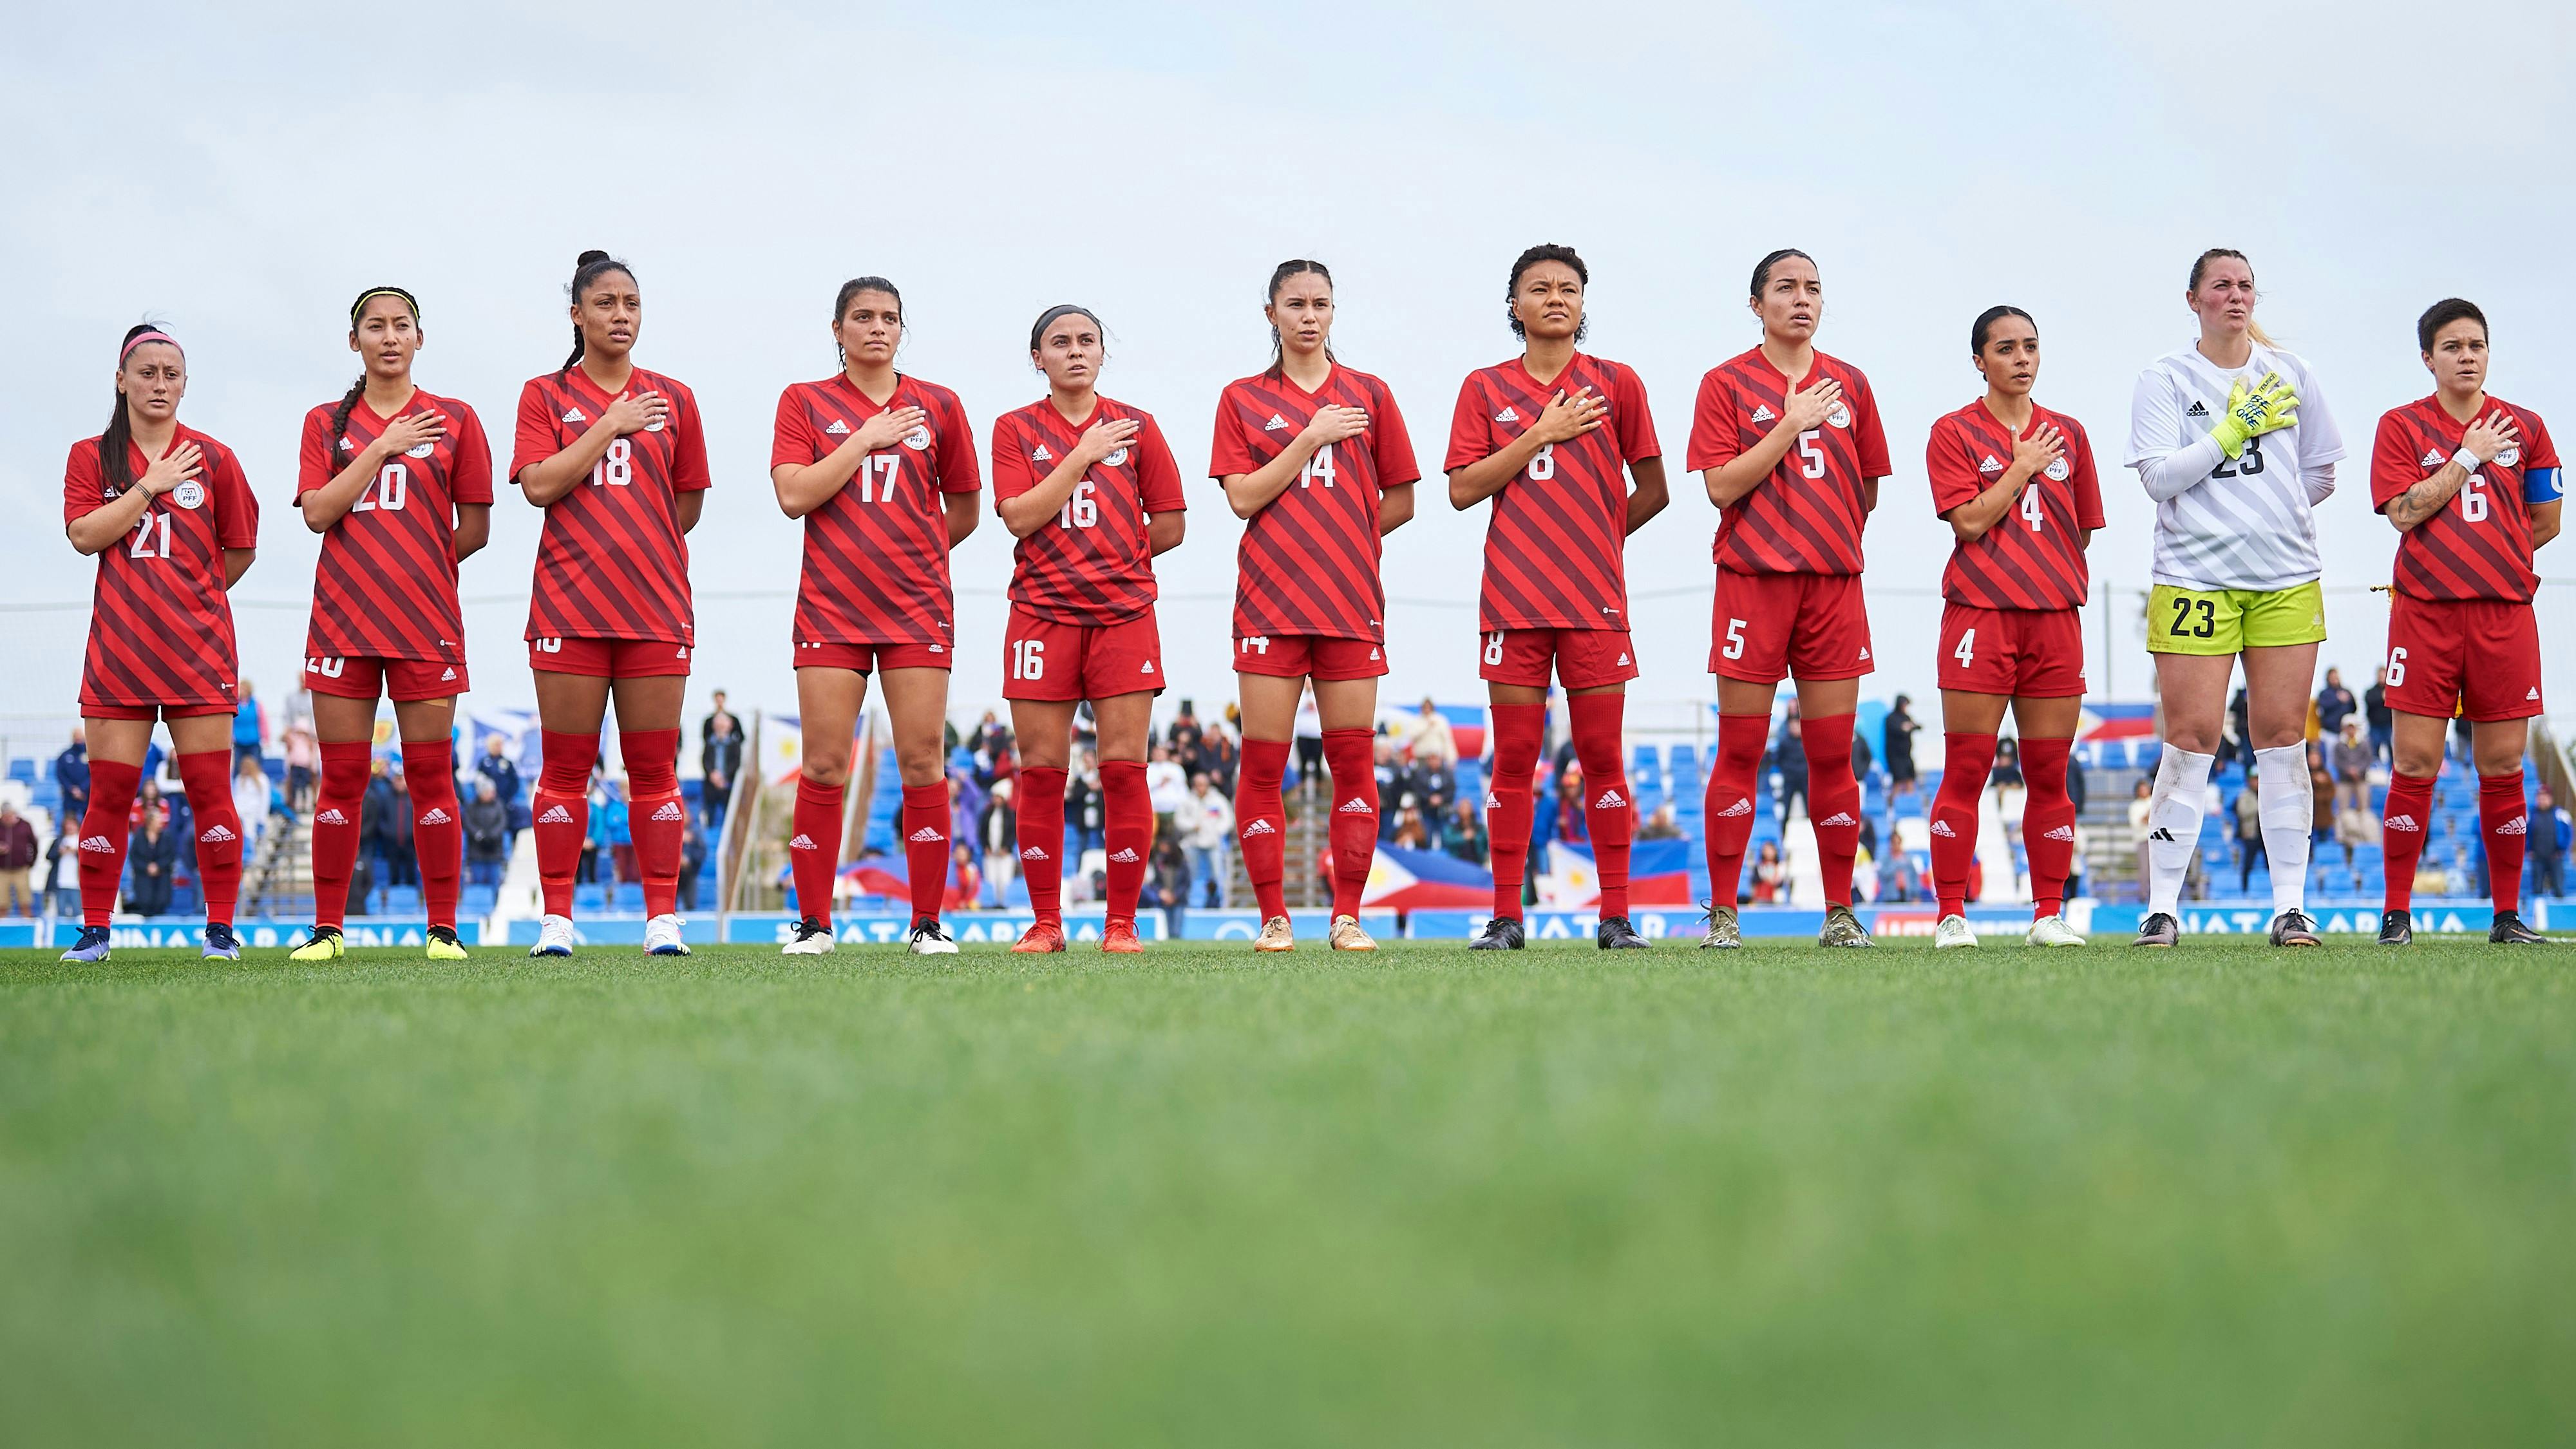 Cignal TV secures broadcast rights to FIFA Women’s World Cup 